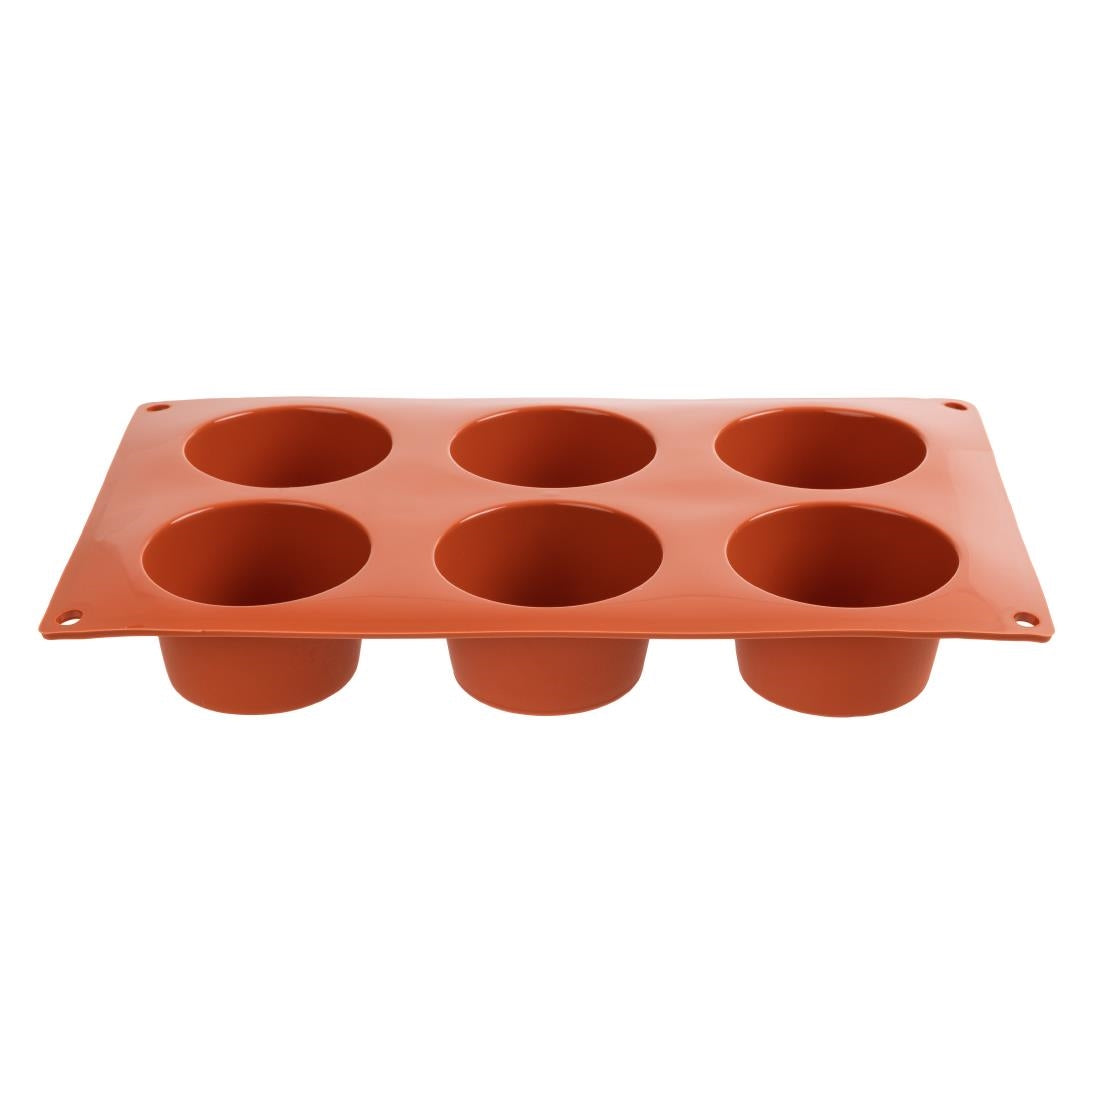 N933 Pavoni Formaflex Silicone Muffin Mould 6 Cup